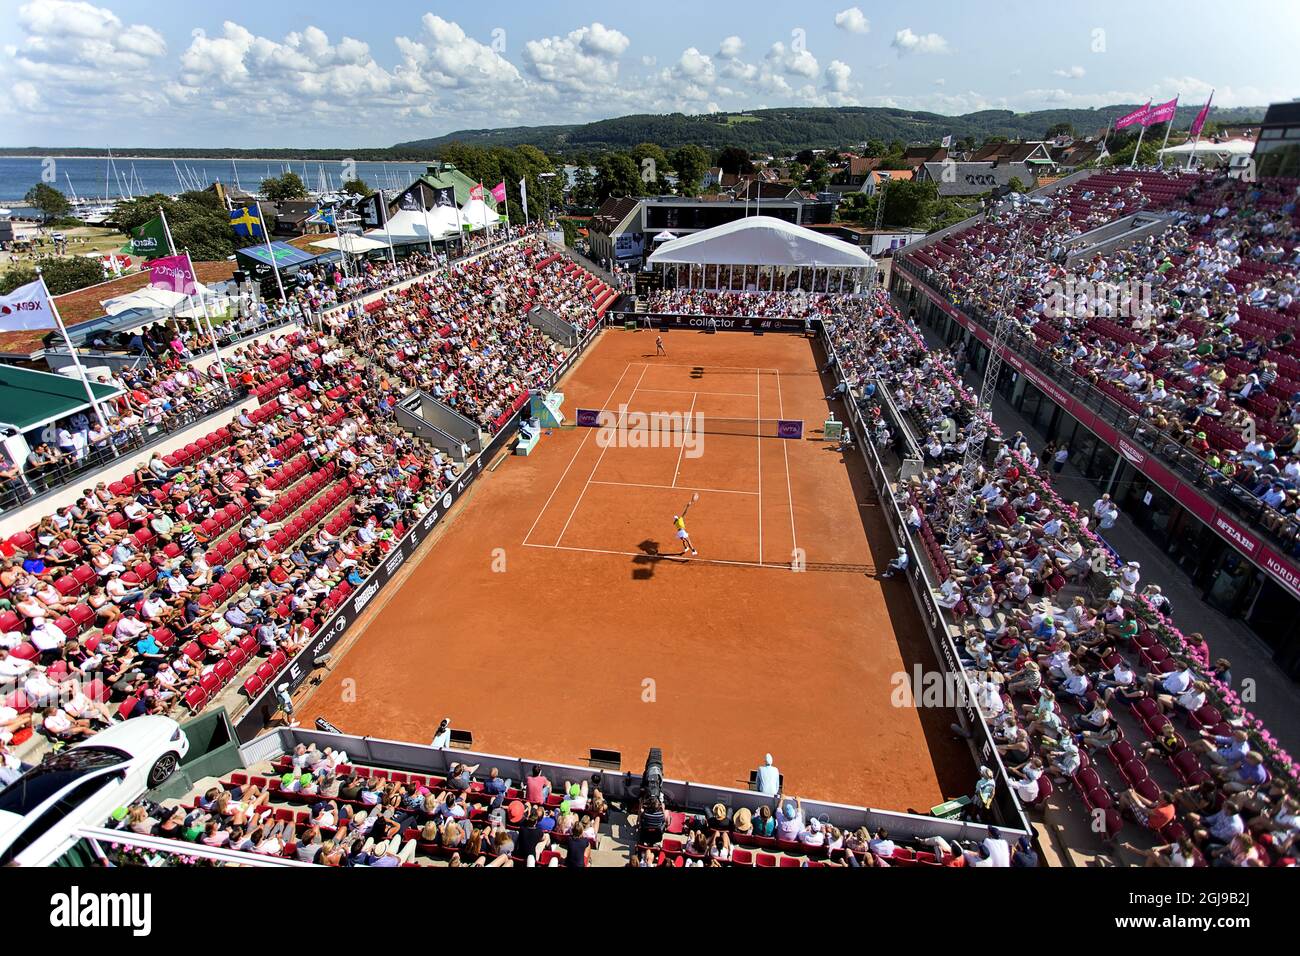 An overview over the tennis court during the semi final WTA Swedish Open  match between Yulia Putintseva of Kazakhstan and Johanna Larsson of Sweden  in Bastad, Sweden, on July 18, 2015. Photo: